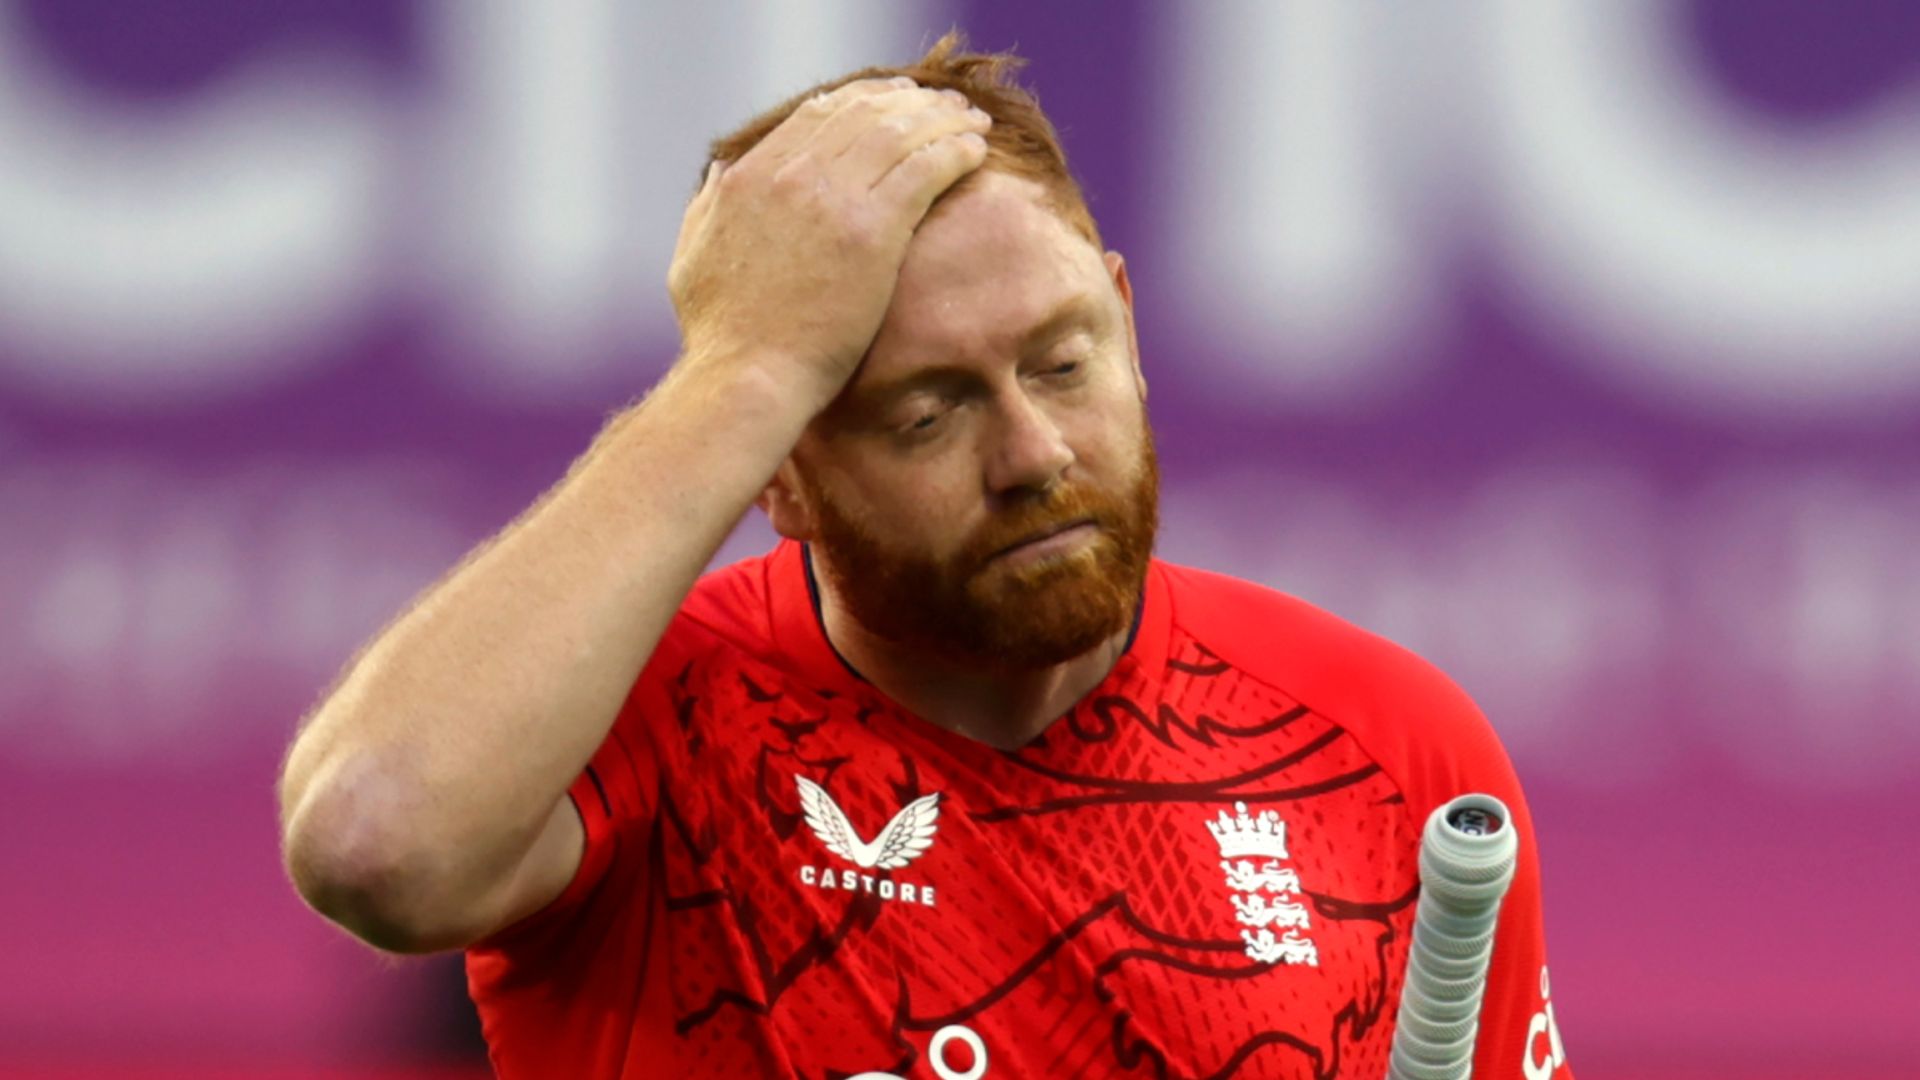 Bairstow out until 2023 after breaking leg in golf accident